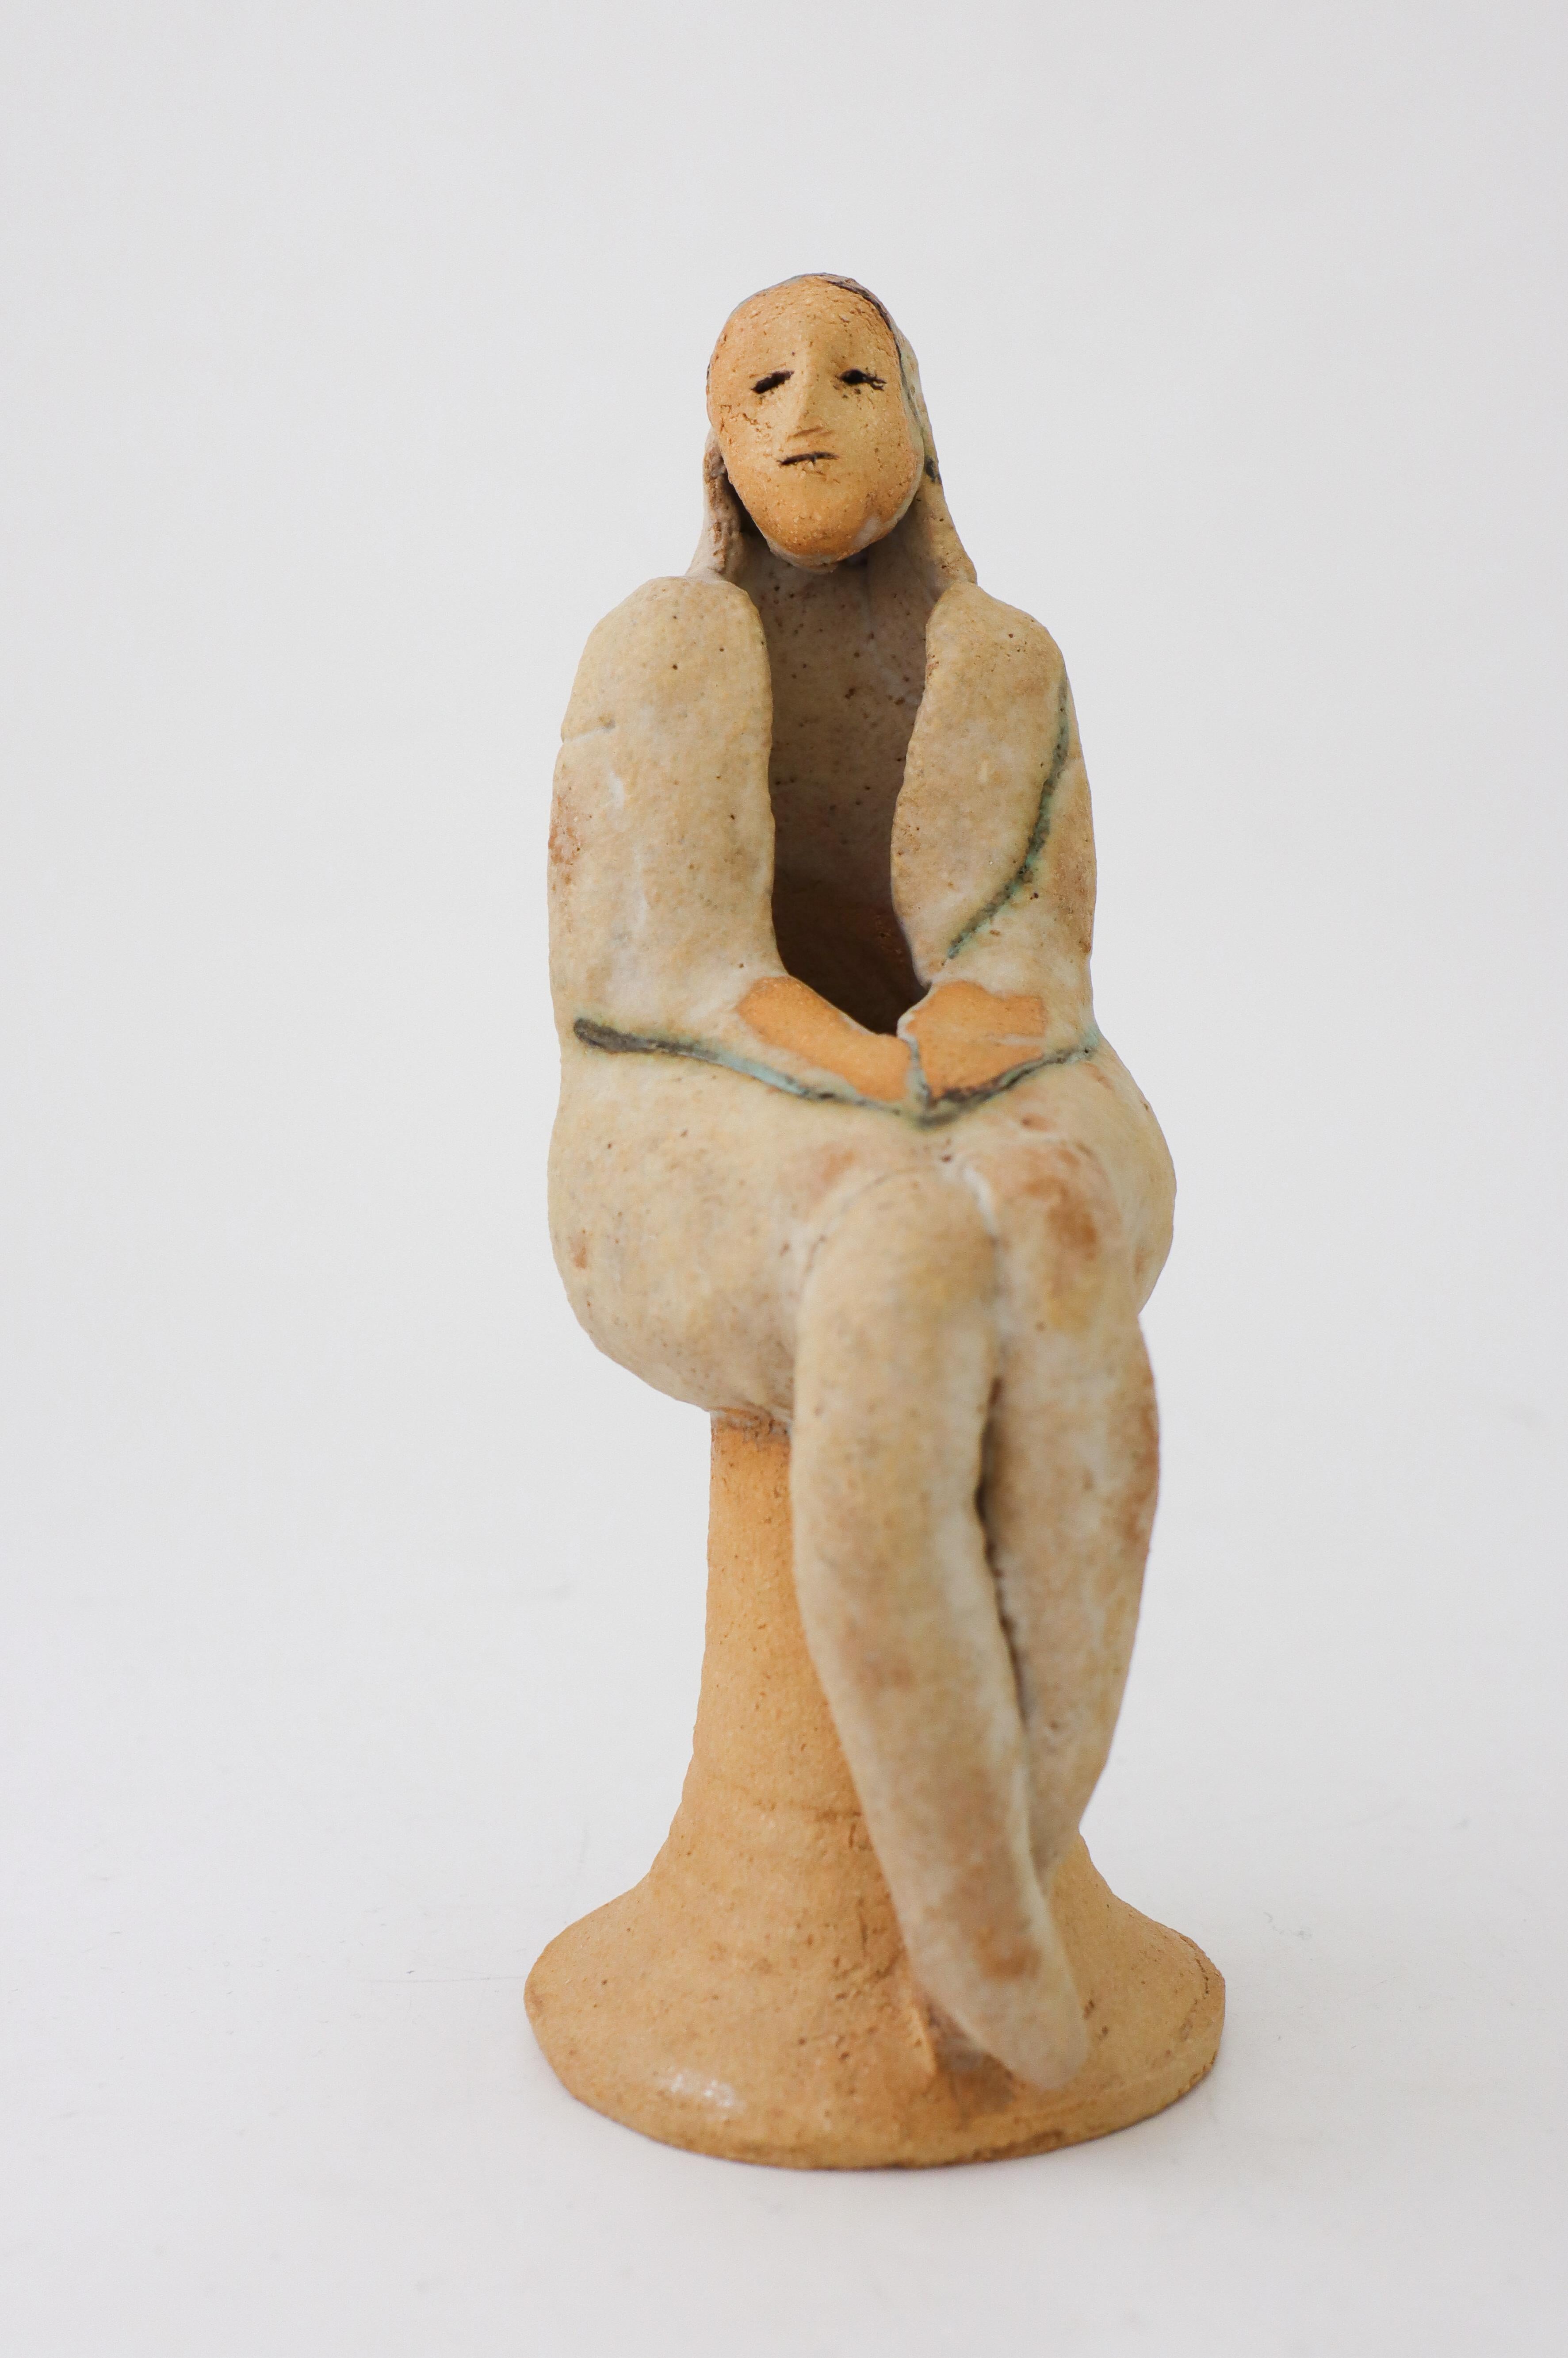 A unique sculpture handcrafted by Lisa Larson at Gustavsbergs Studio, Sweden in the late 20th century. The sculpture is 20.5 cm (8.2